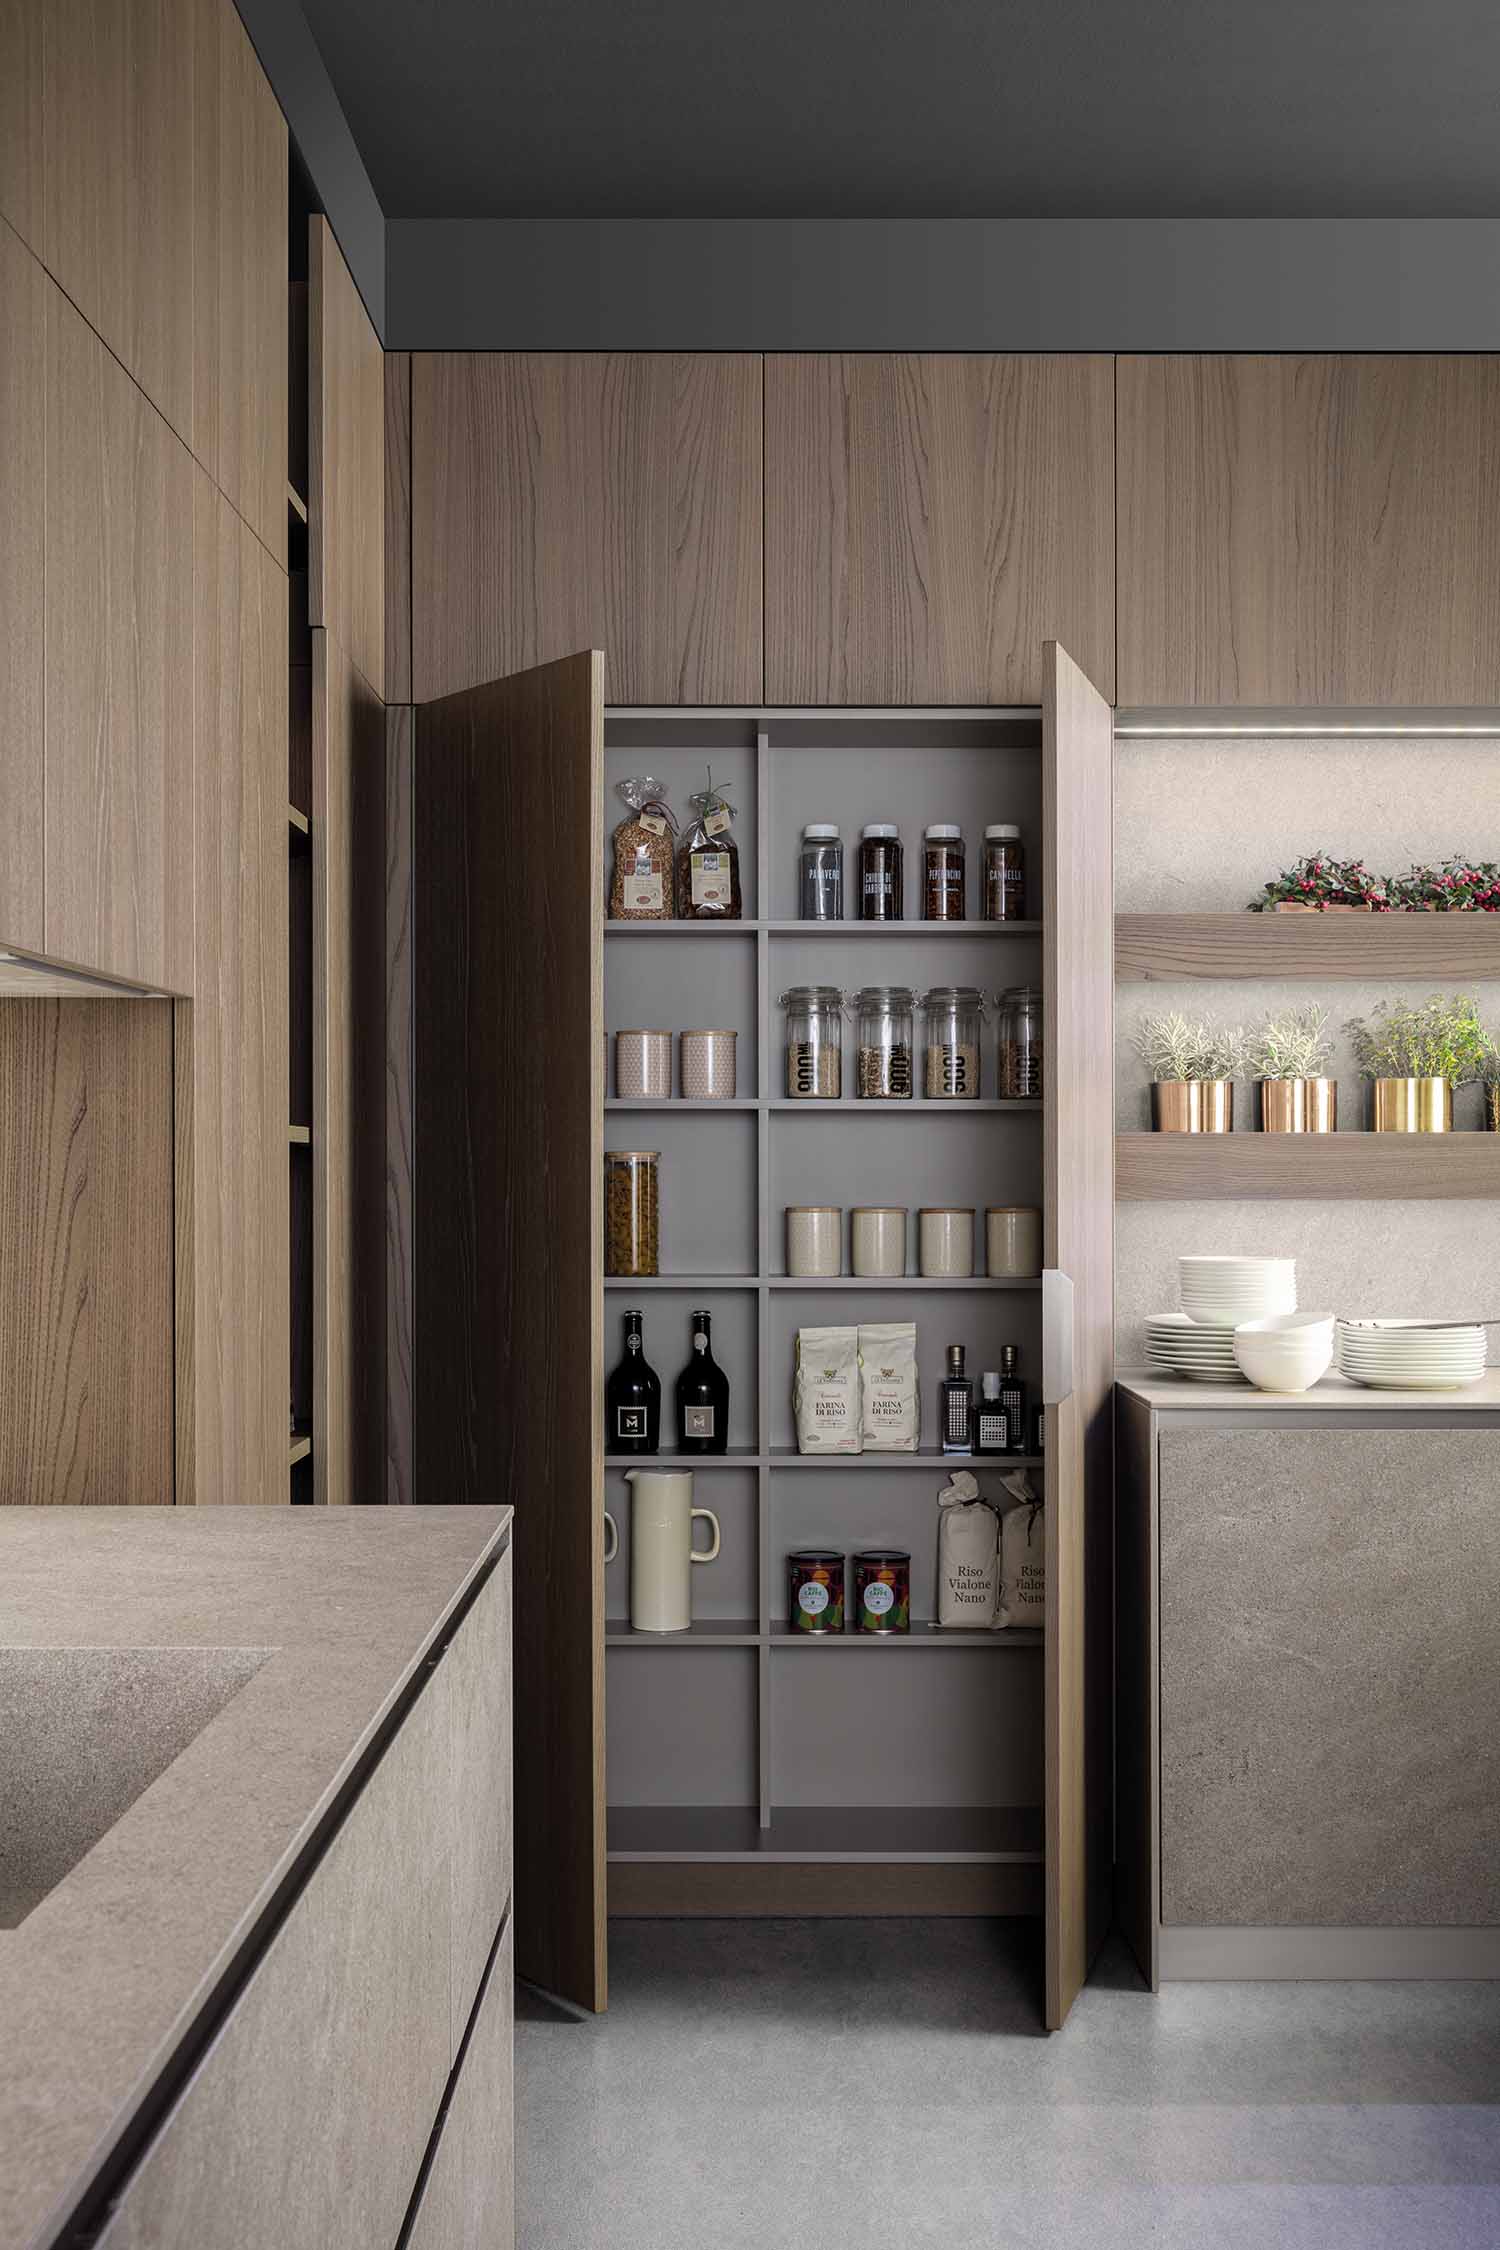 Kitchen 33cm deep tall unit pantry is easily accessible with interior shelves.